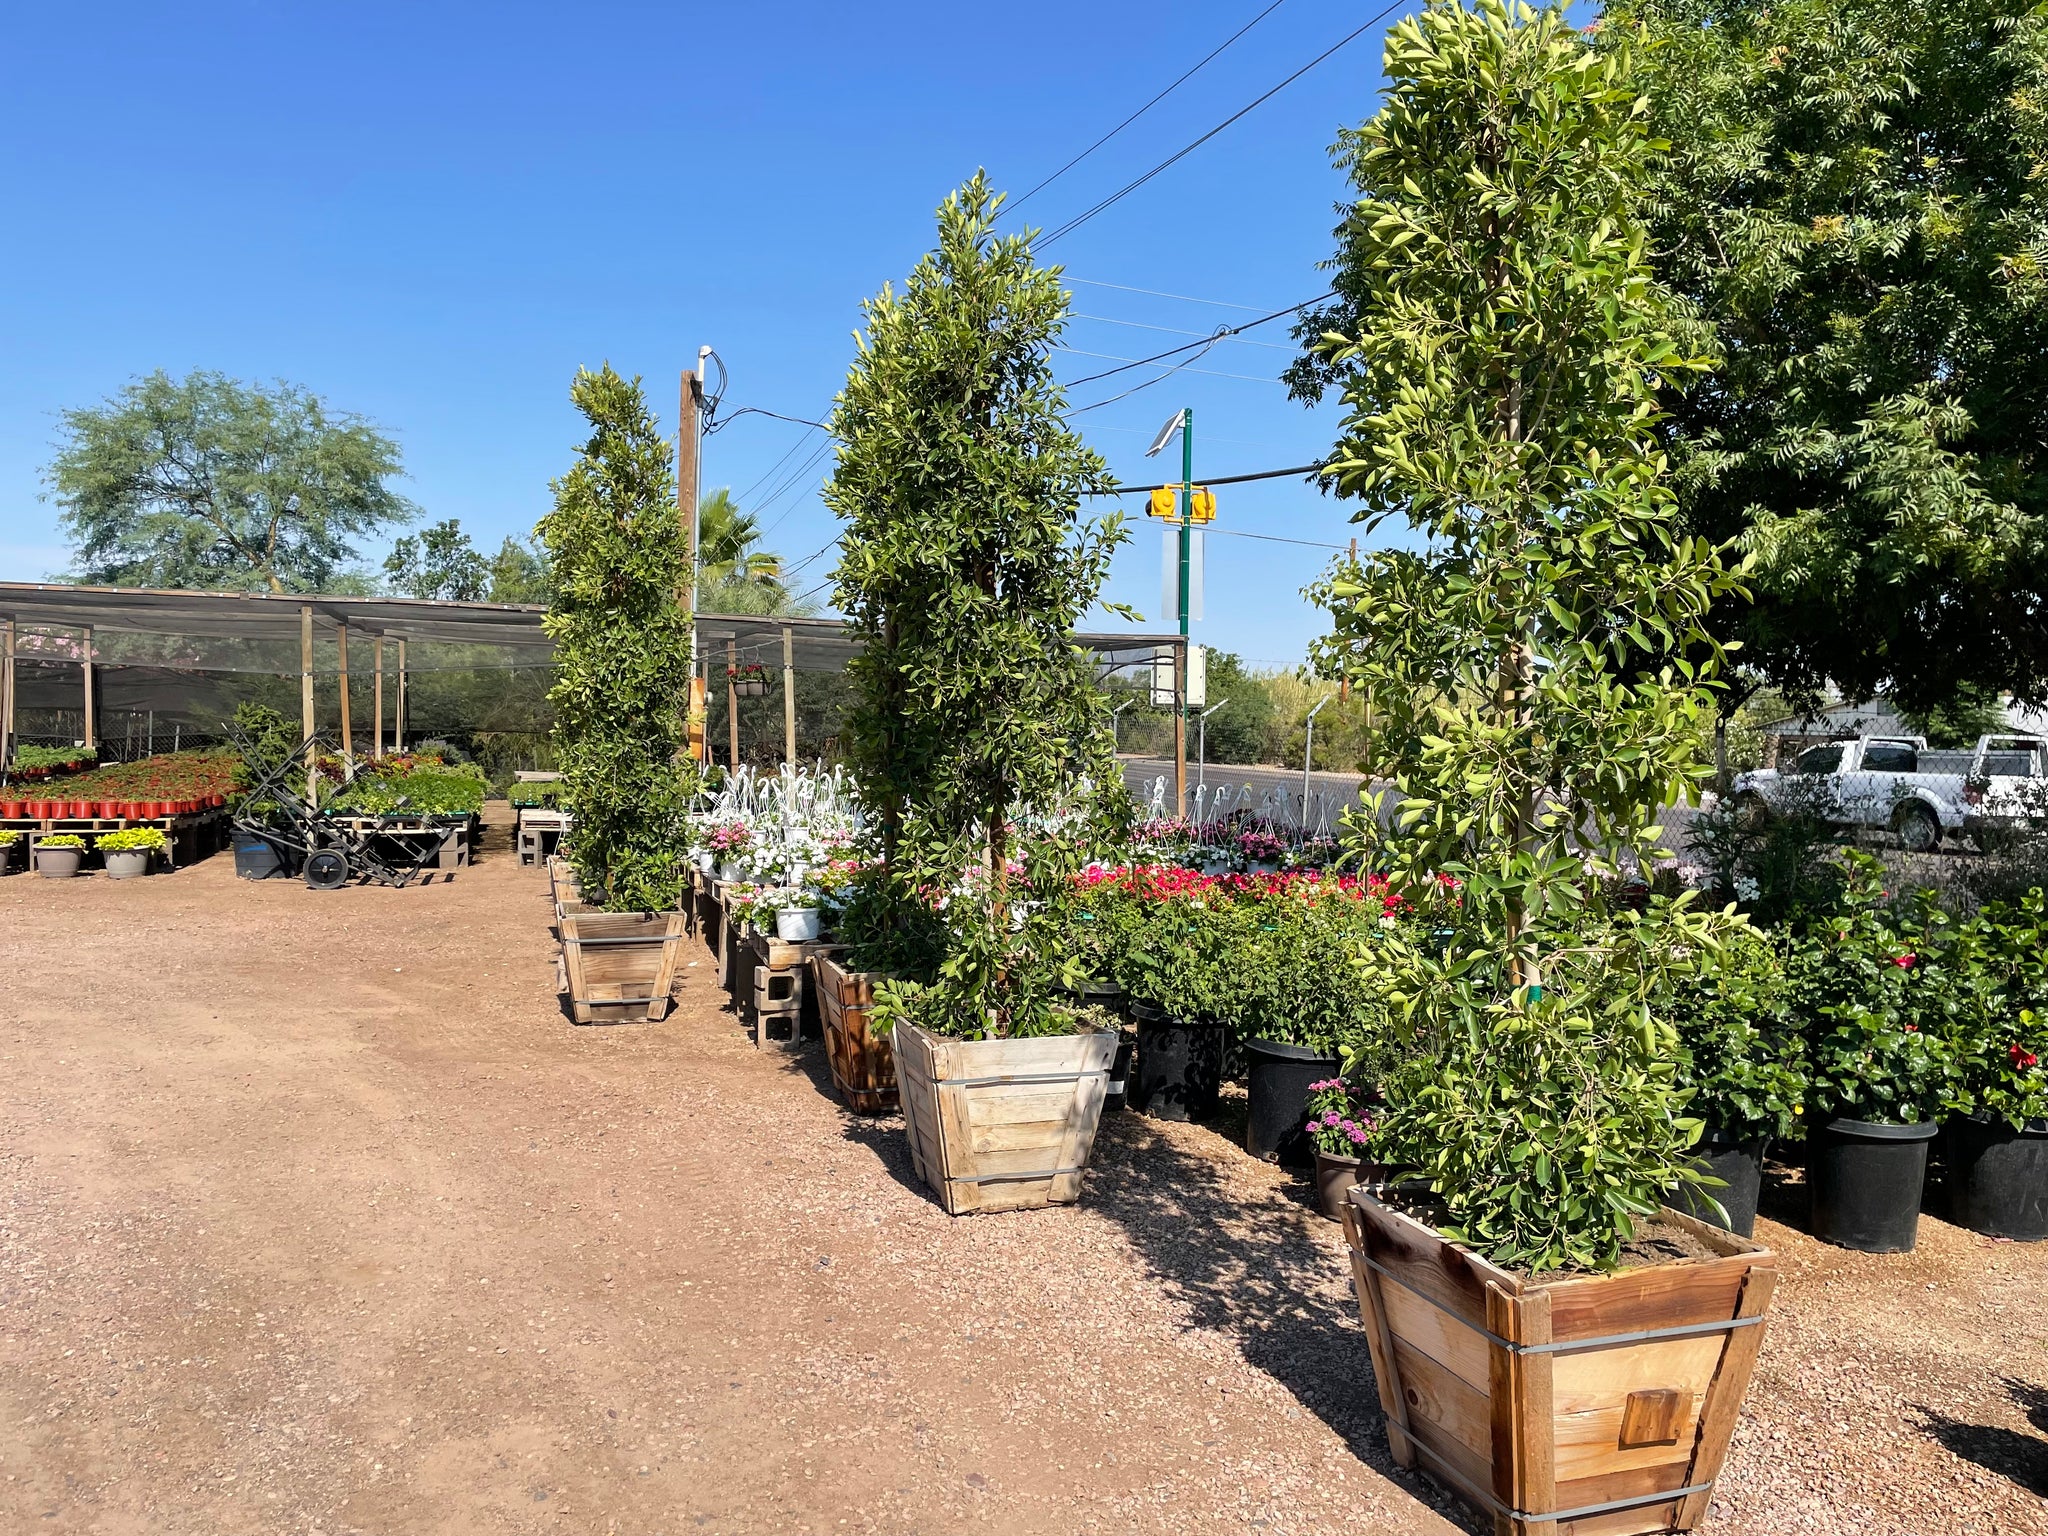 Tall Indian Laurel Coulmns, 'Ficus nitida' Hollywood hedge - 24 box